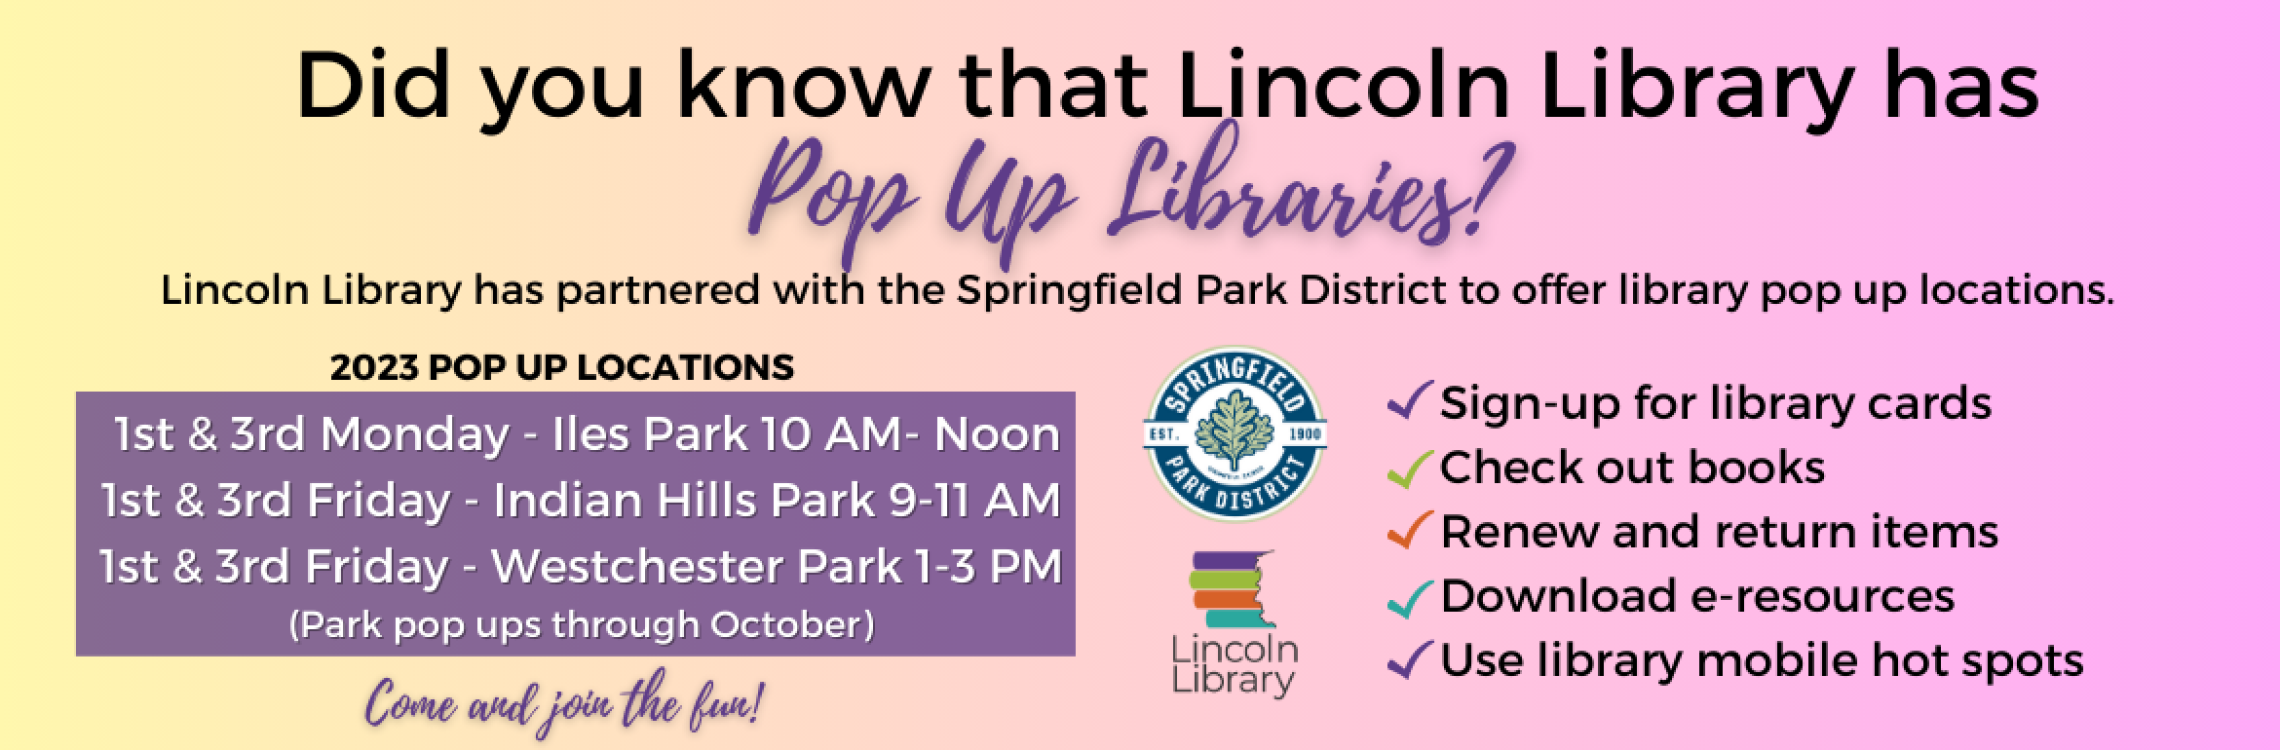 Lincoln Library has Pop-Up Libraries!